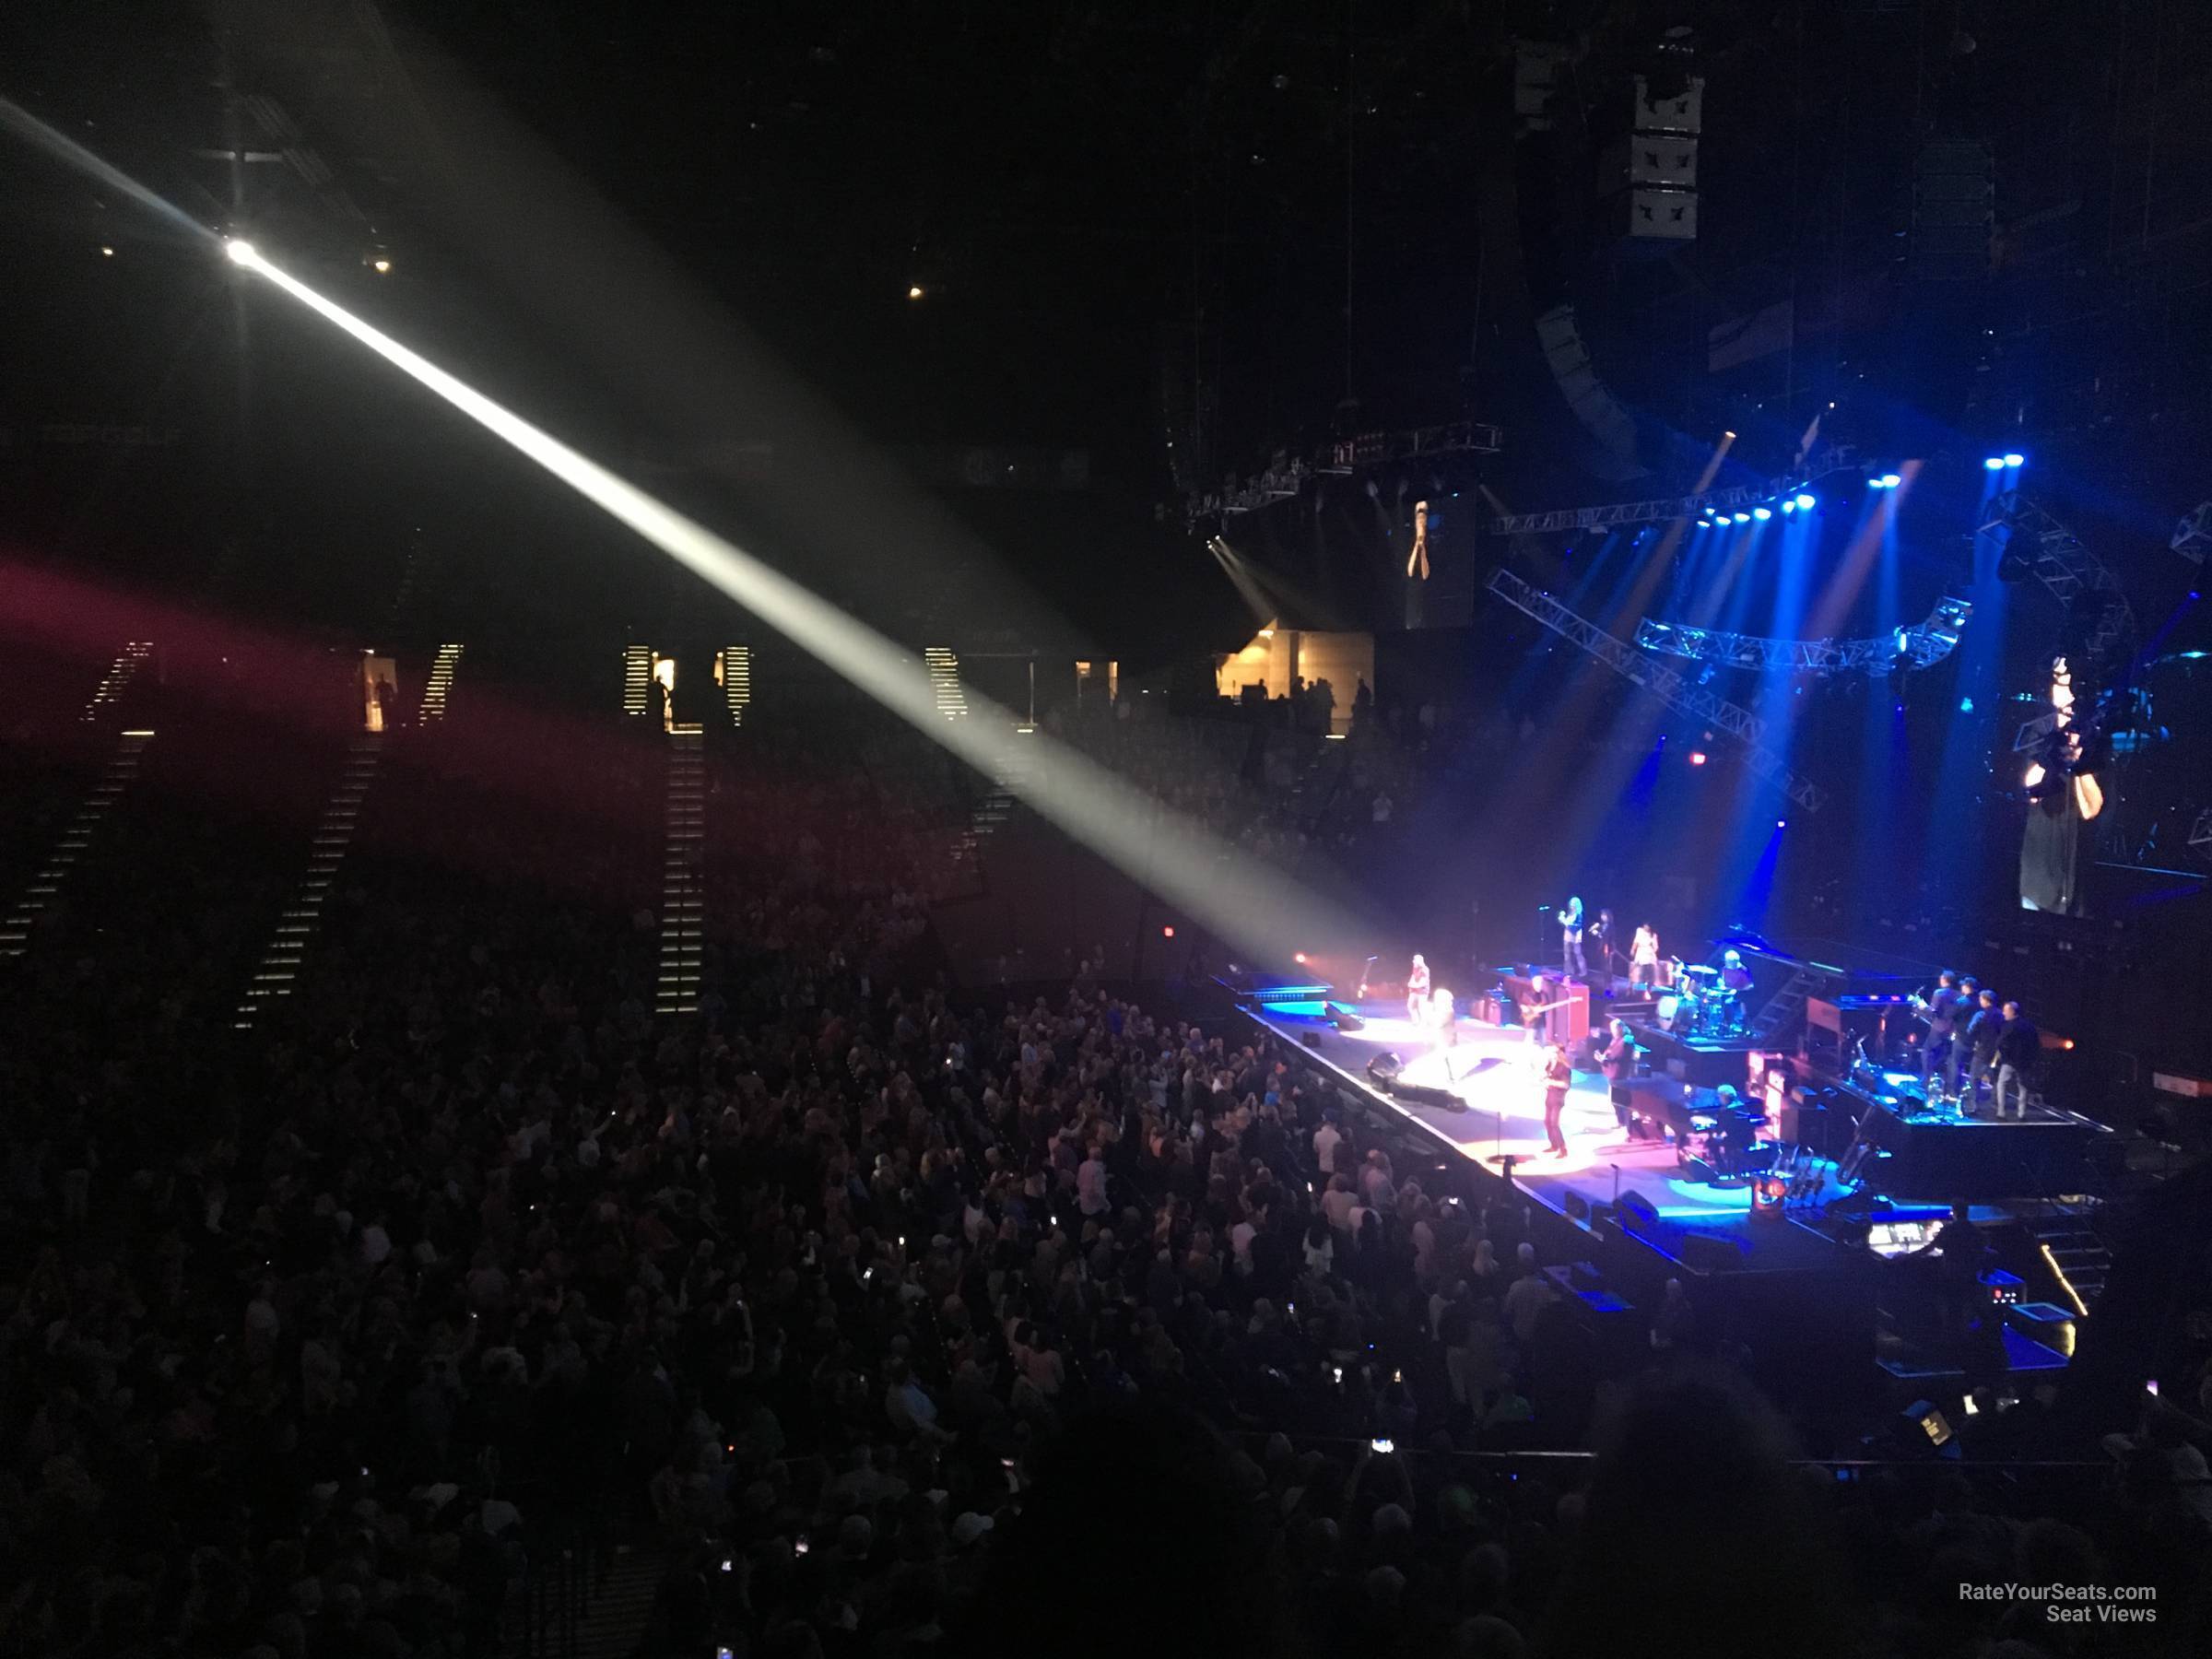 section 16, row x seat view  - mgm grand garden arena